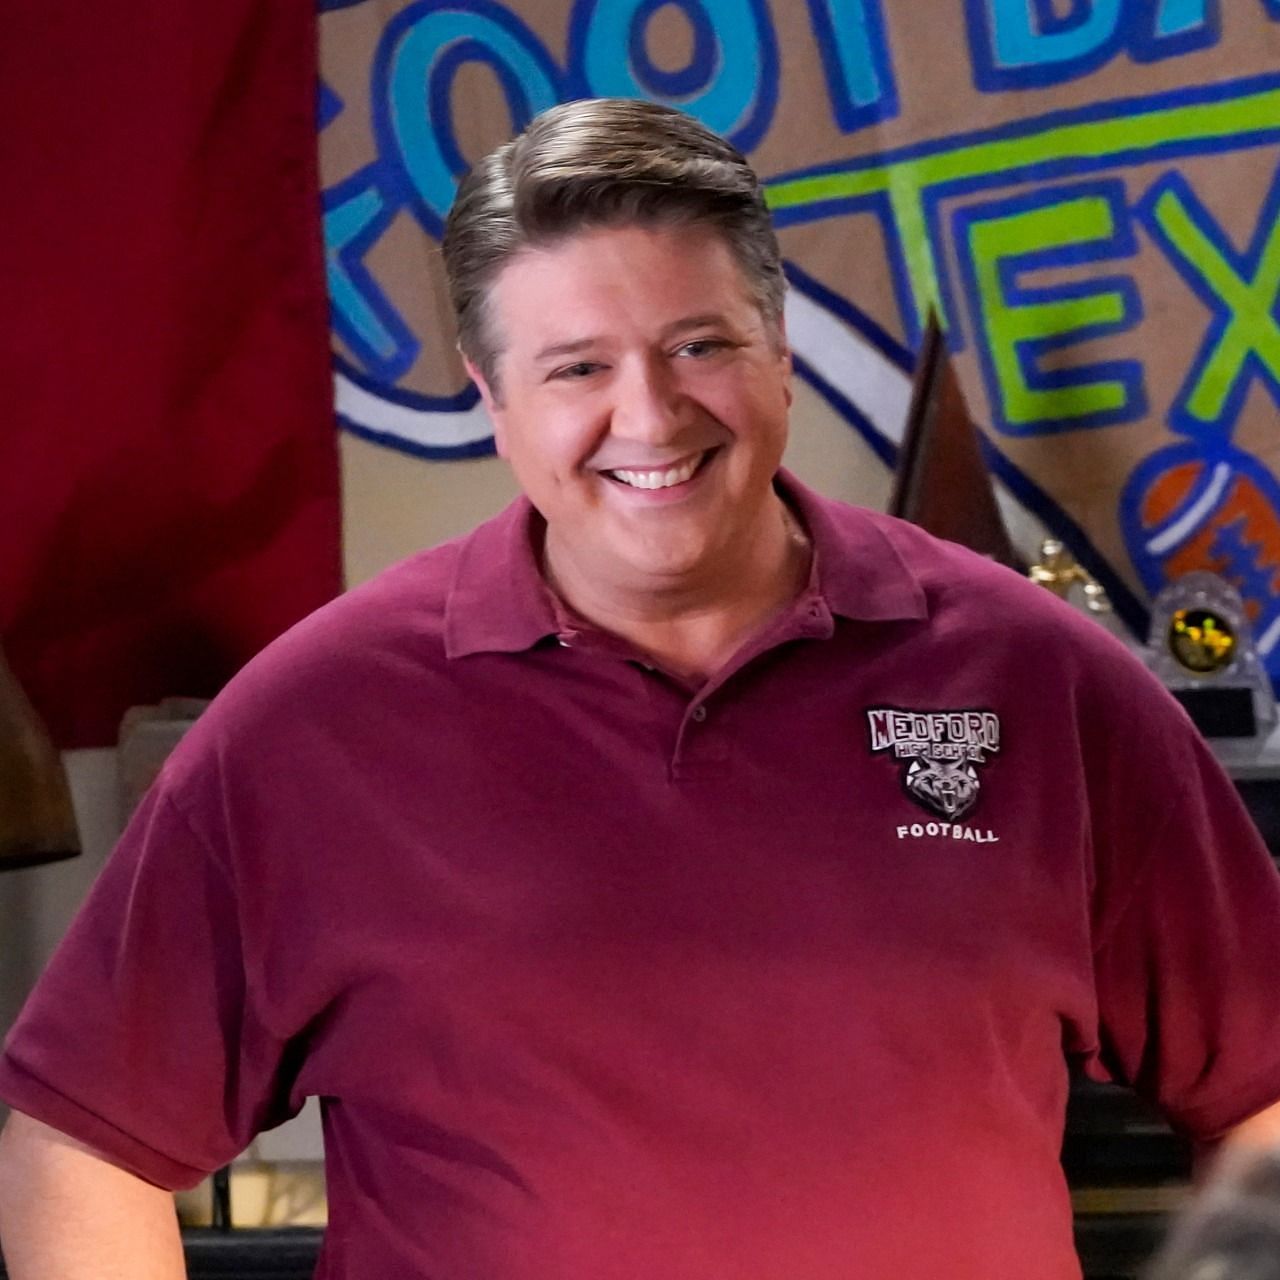 Lance Barber seen as George Cooper in Young Sheldon (Image Via Facebook/@Young Sheldon)